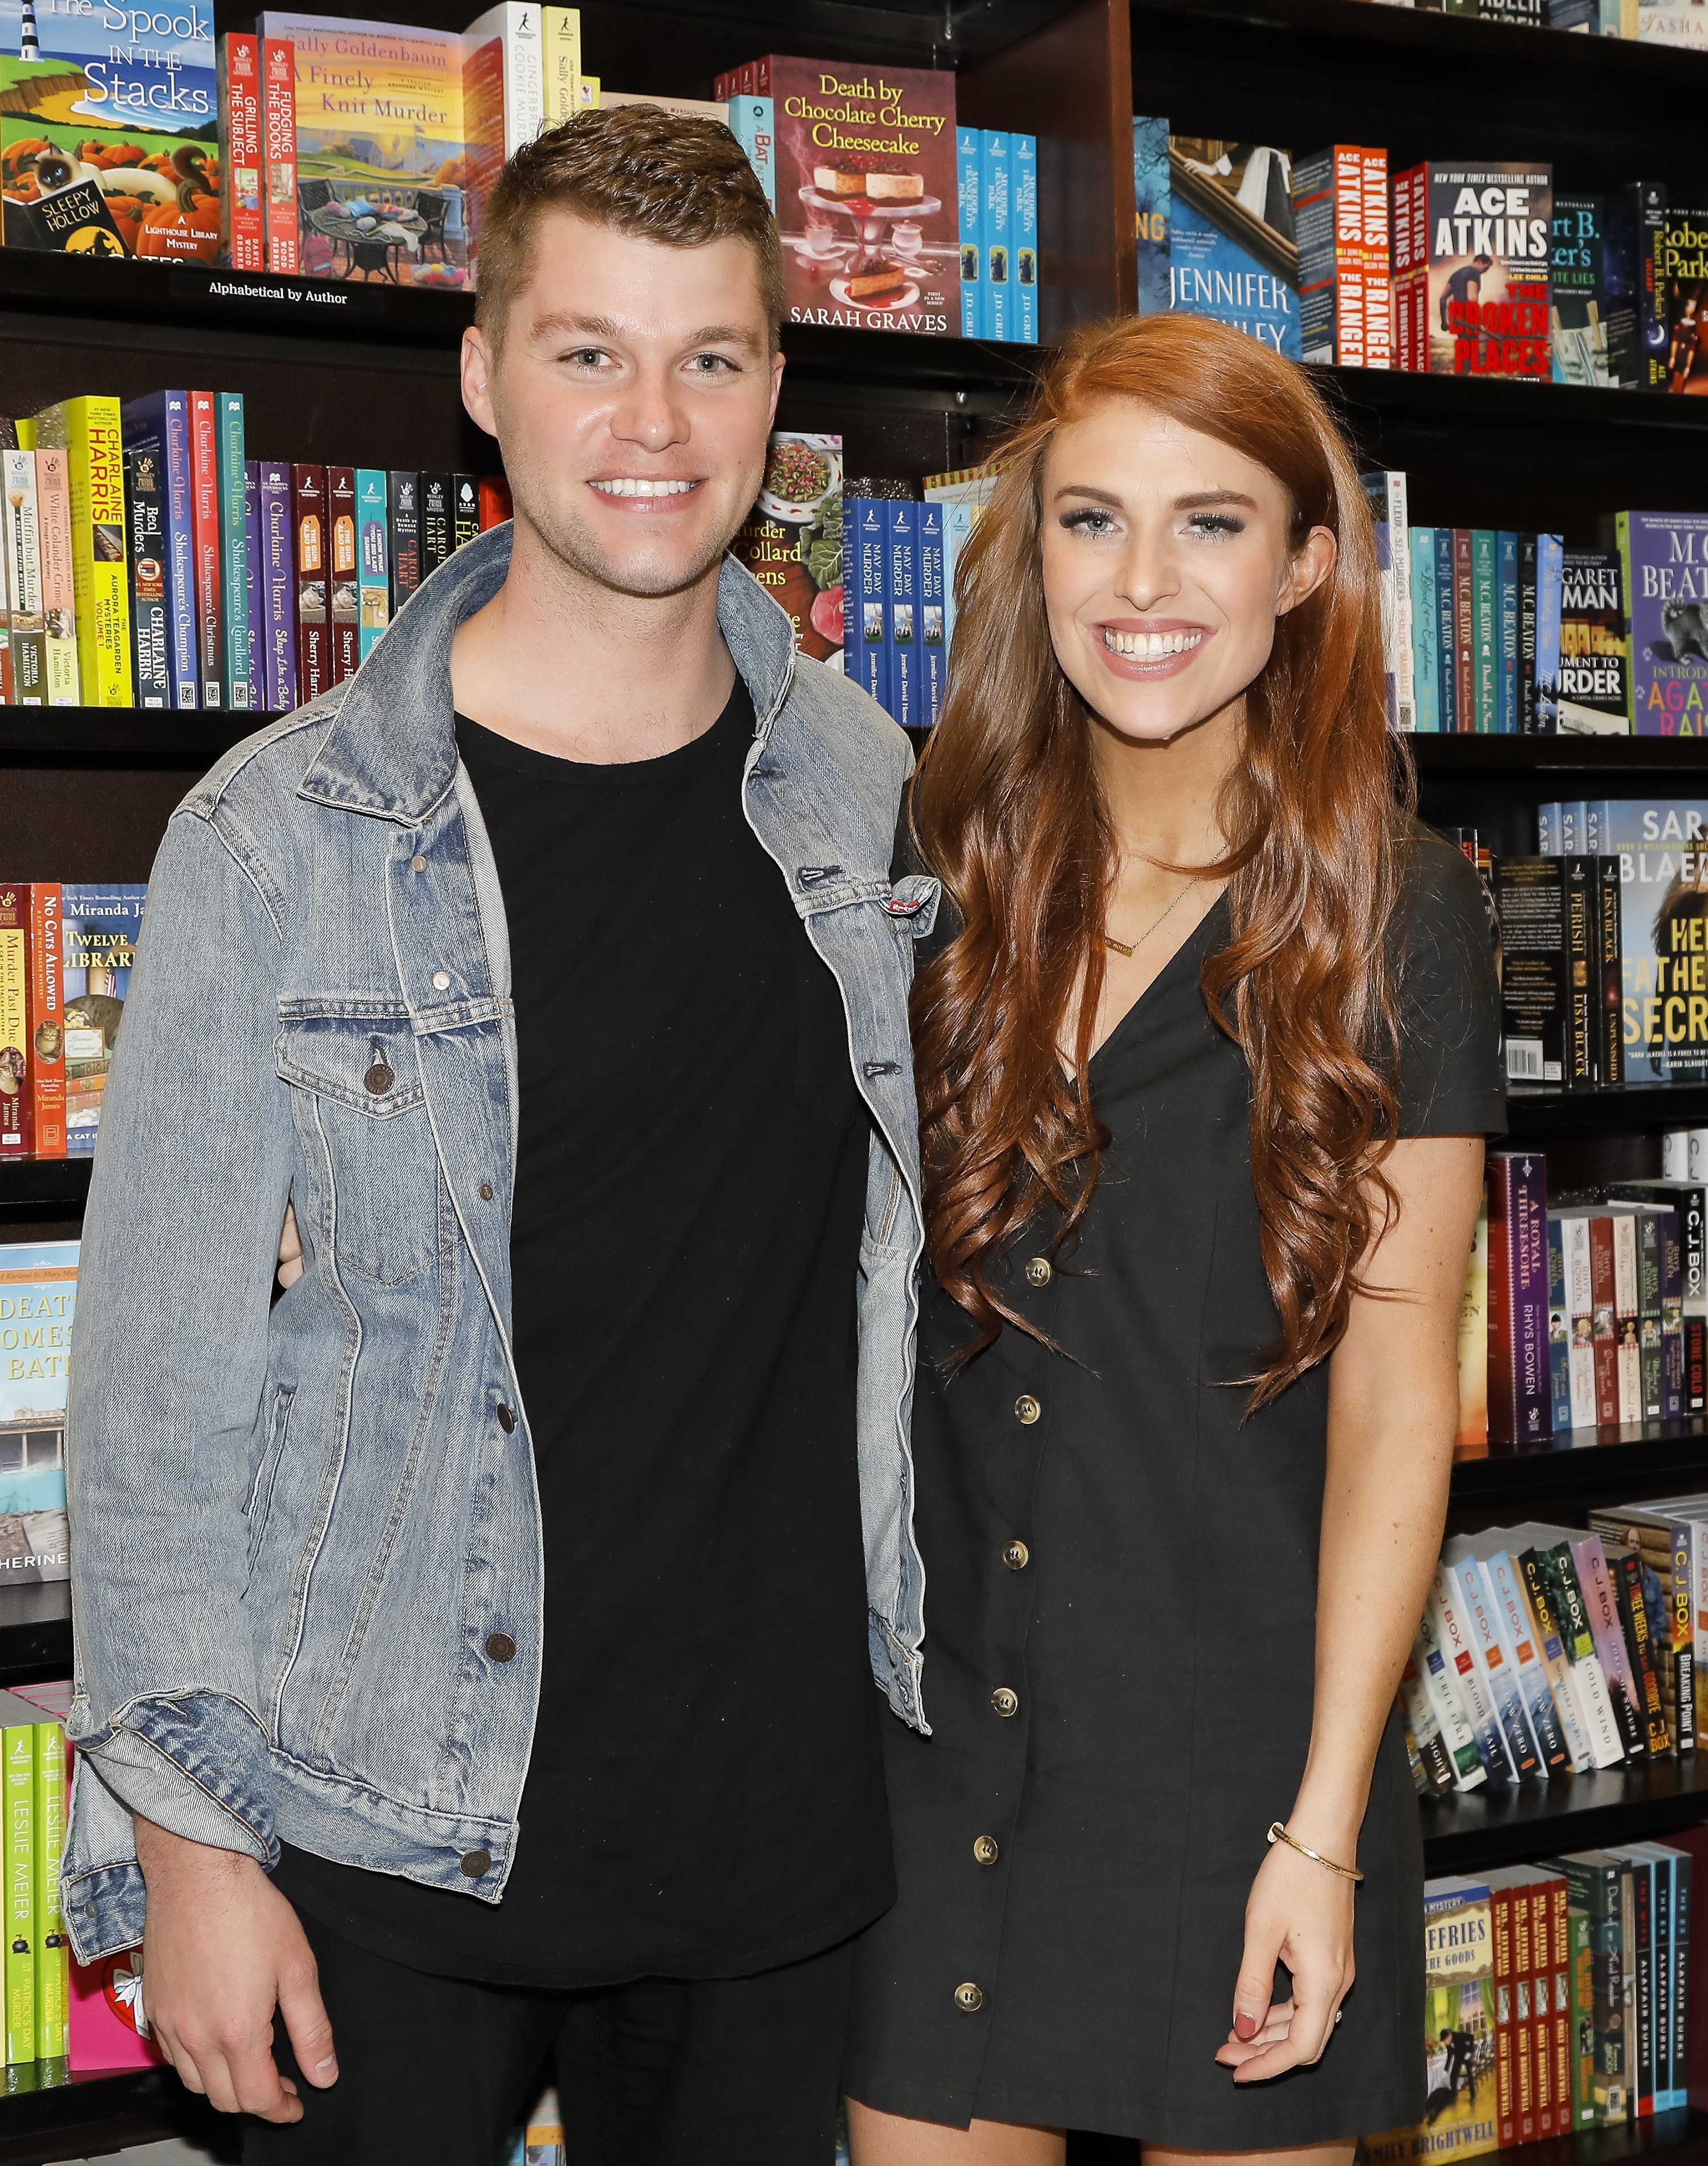 Jeremy Roloff and Audrey Roloff celebrate their new book 'A Love Letter Life' at Barnes & Noble on April 10, 2019 in Los Angeles, California. | Source: Getty Images